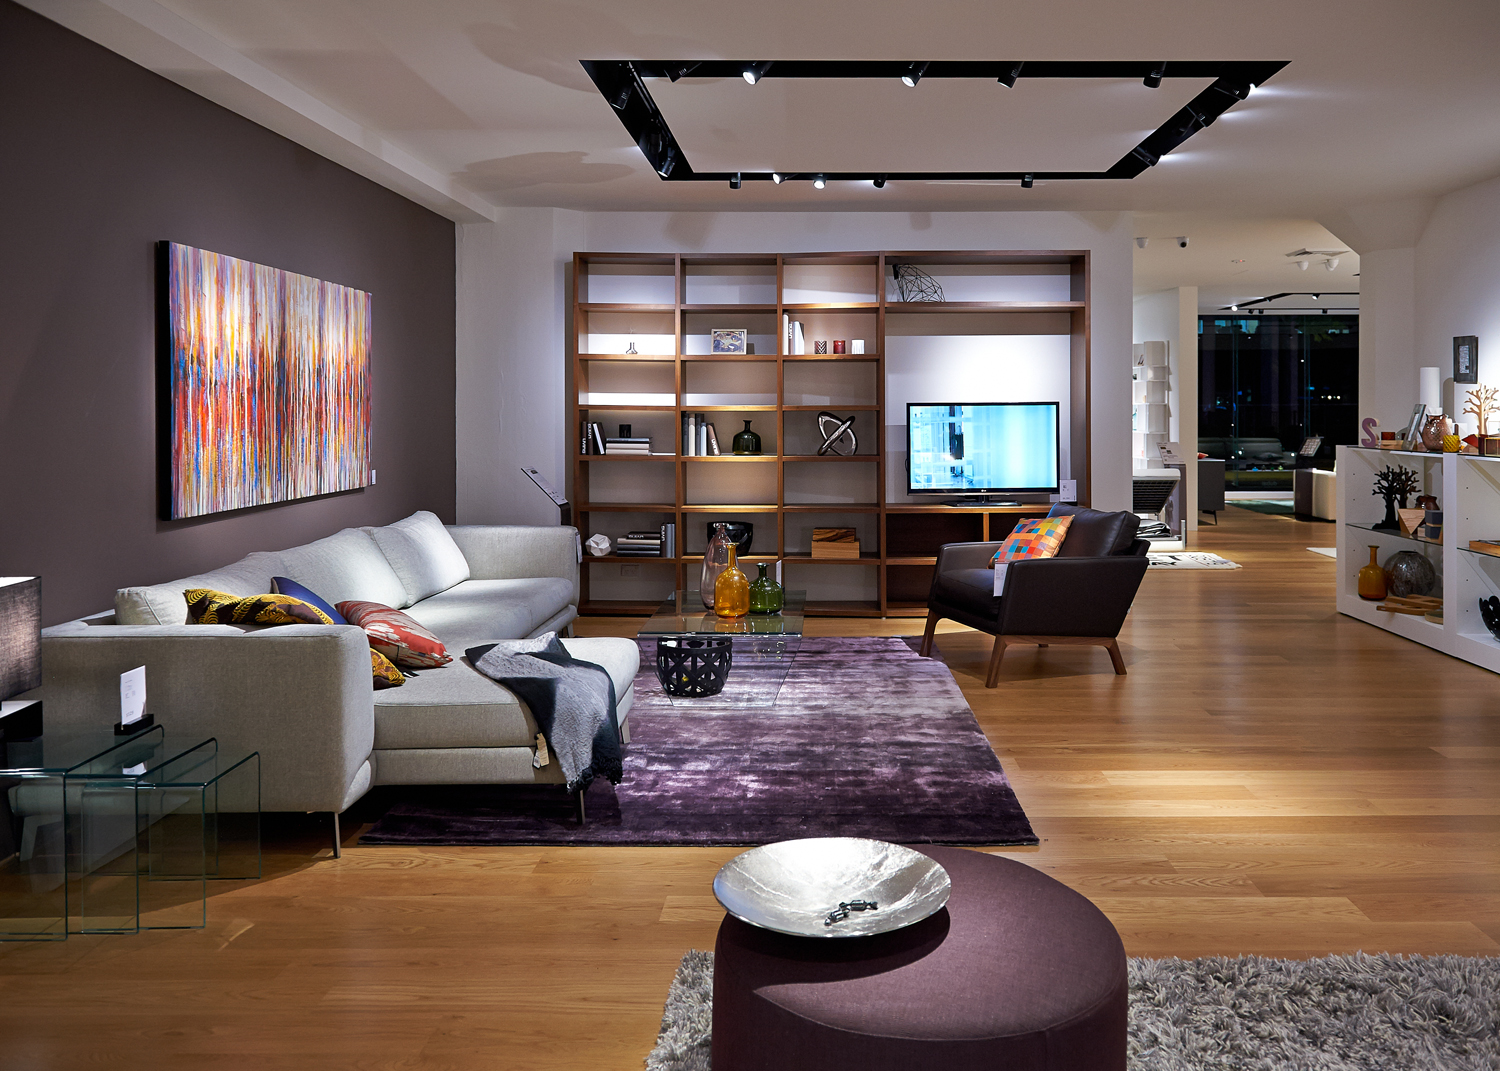 The BoConcept showroom, where the event is taking place